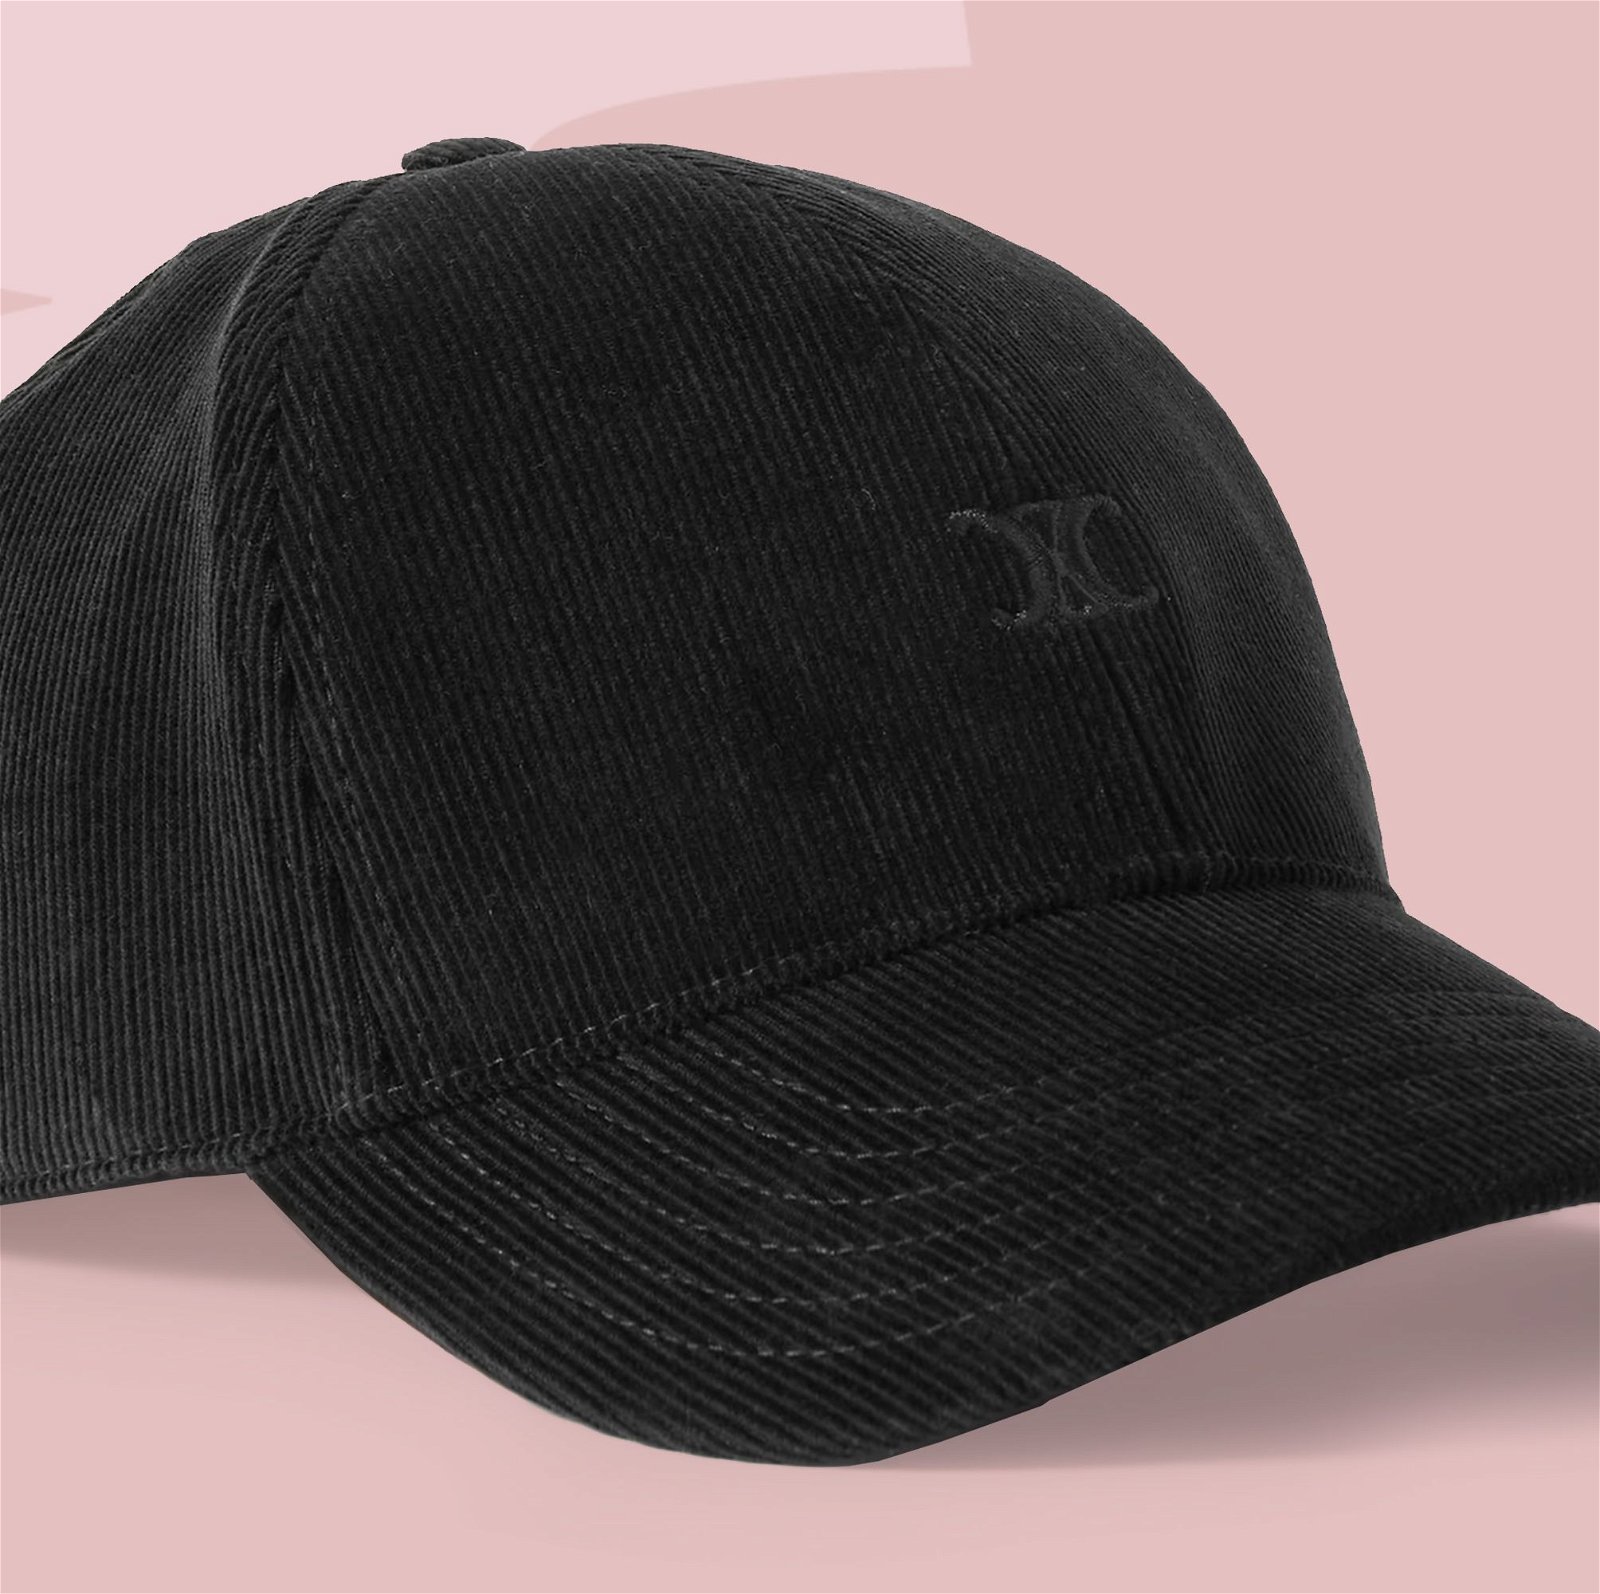 The 19 Best Baseball Caps to Wear for Coffee Runs and Home Runs Alike